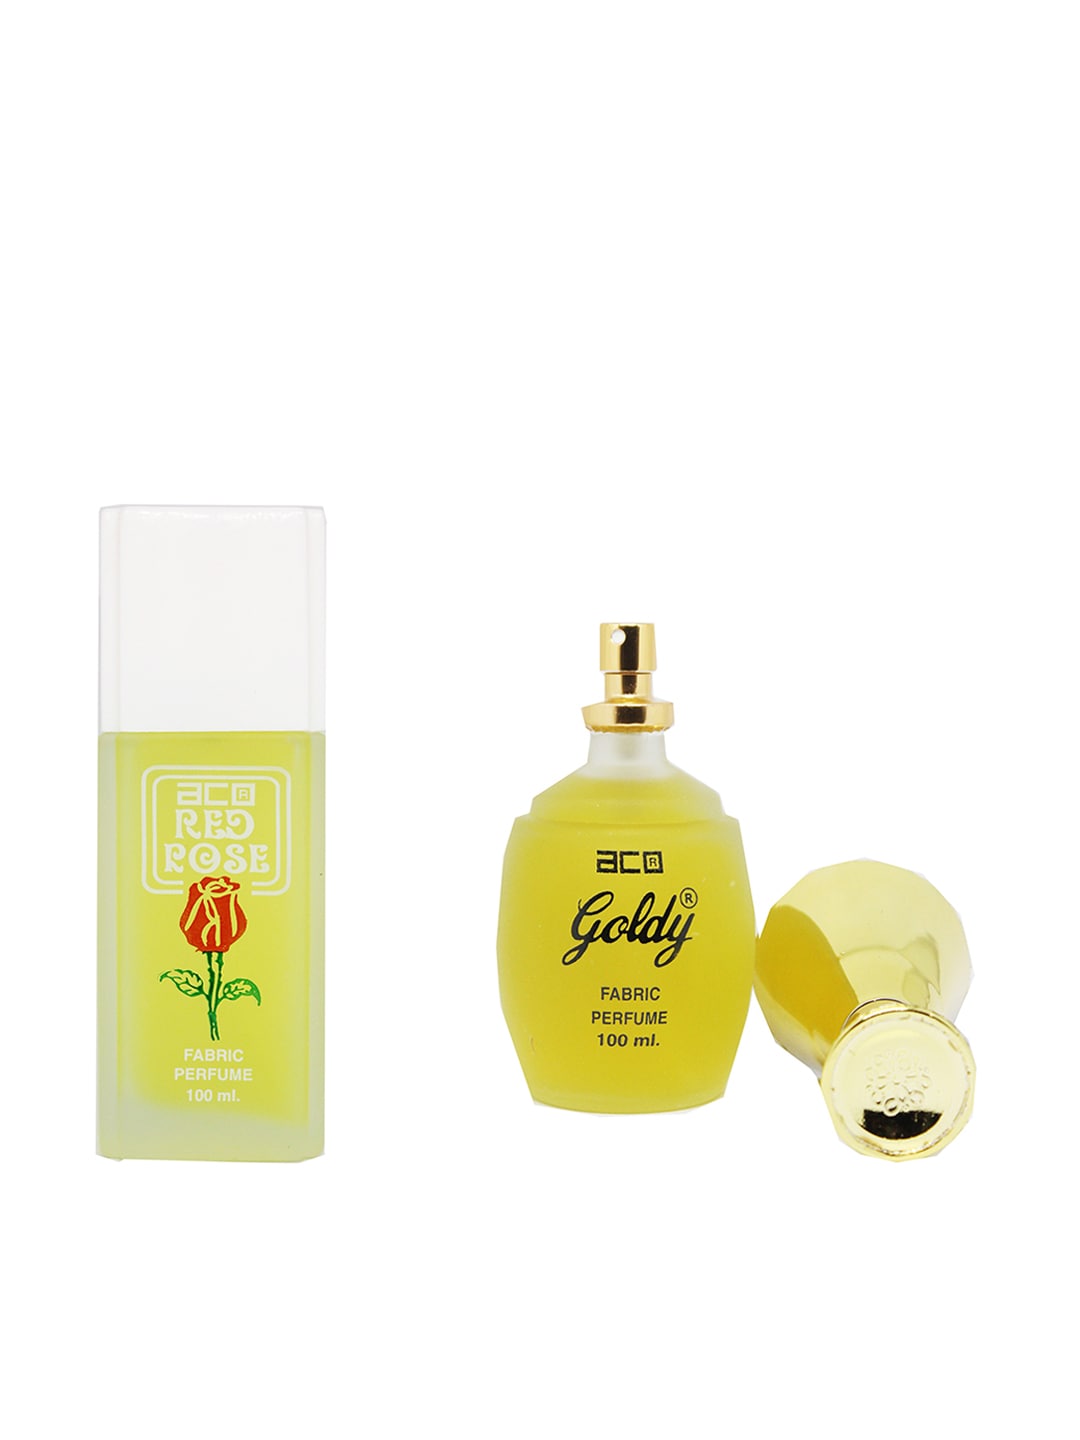 aco PERFUMES Goldy and Red Rose Combo Fabric Perfume 100ML Price in India